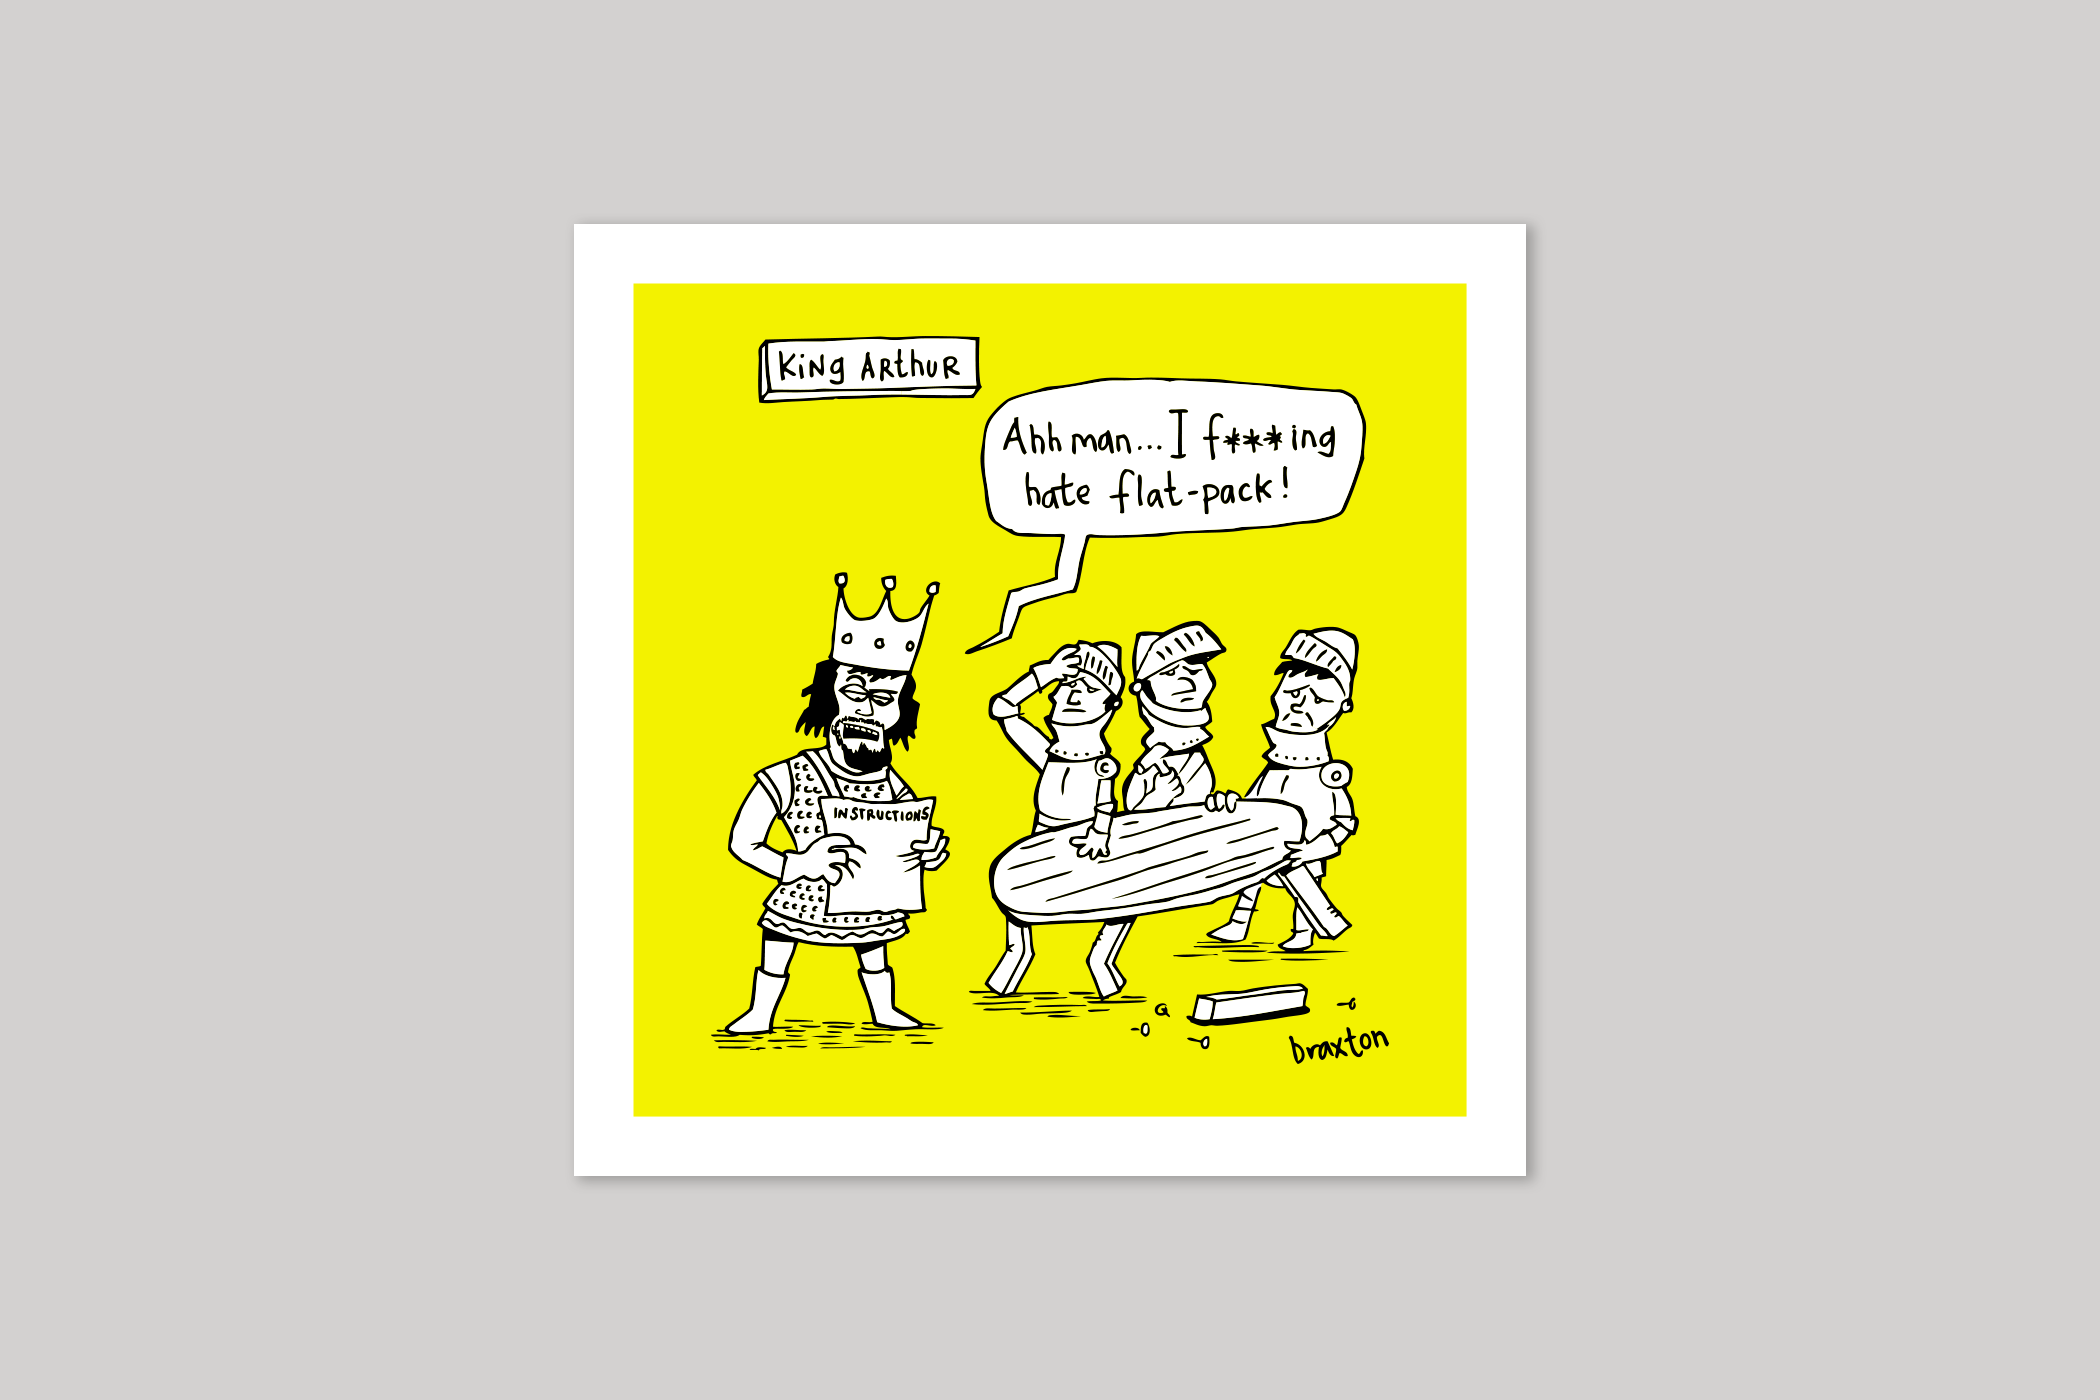 King Arthur humorous illustration from History of the World range of greeting cards by Icon.